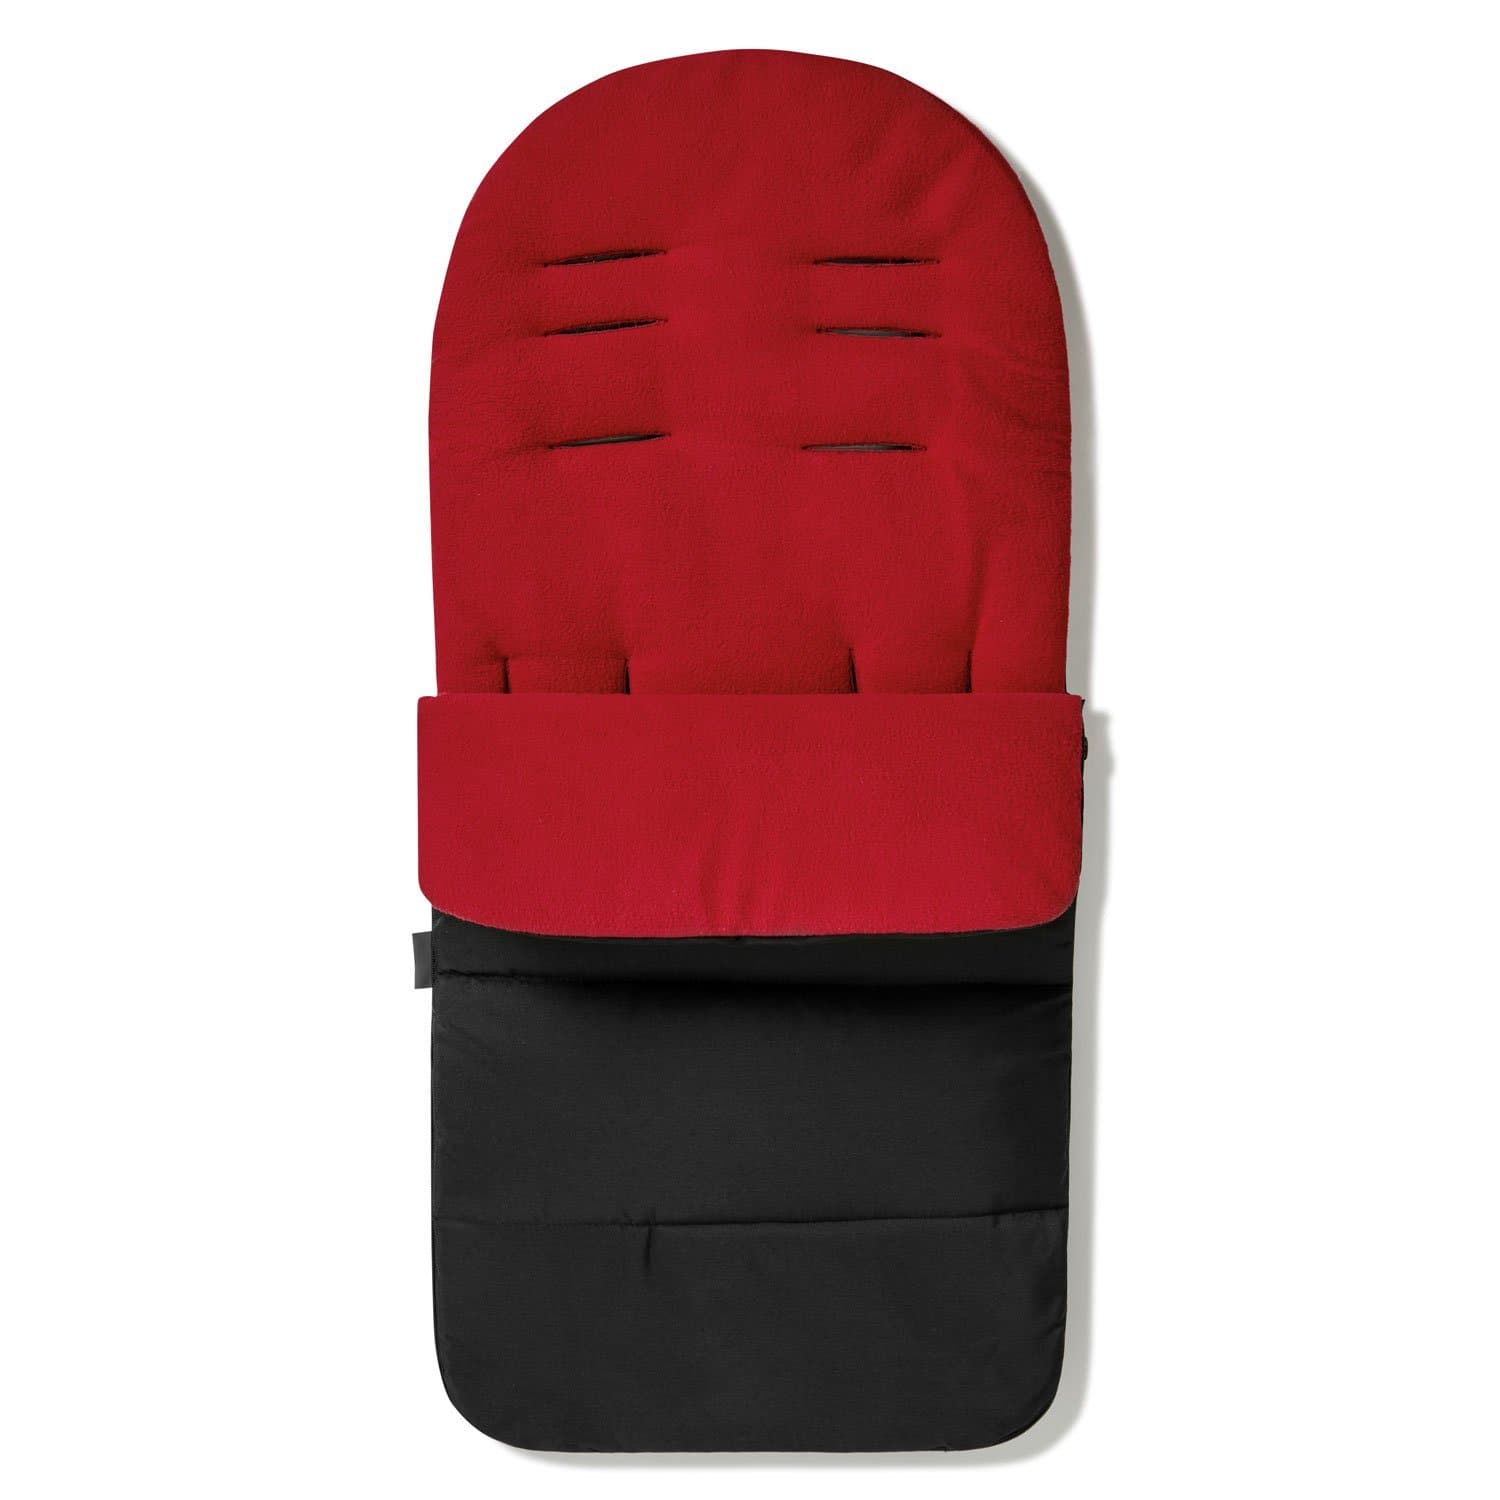 Premium Footmuff / Cosy Toes Compatible with Baby Trend - Fire Red / Fits All Models | For Your Little One